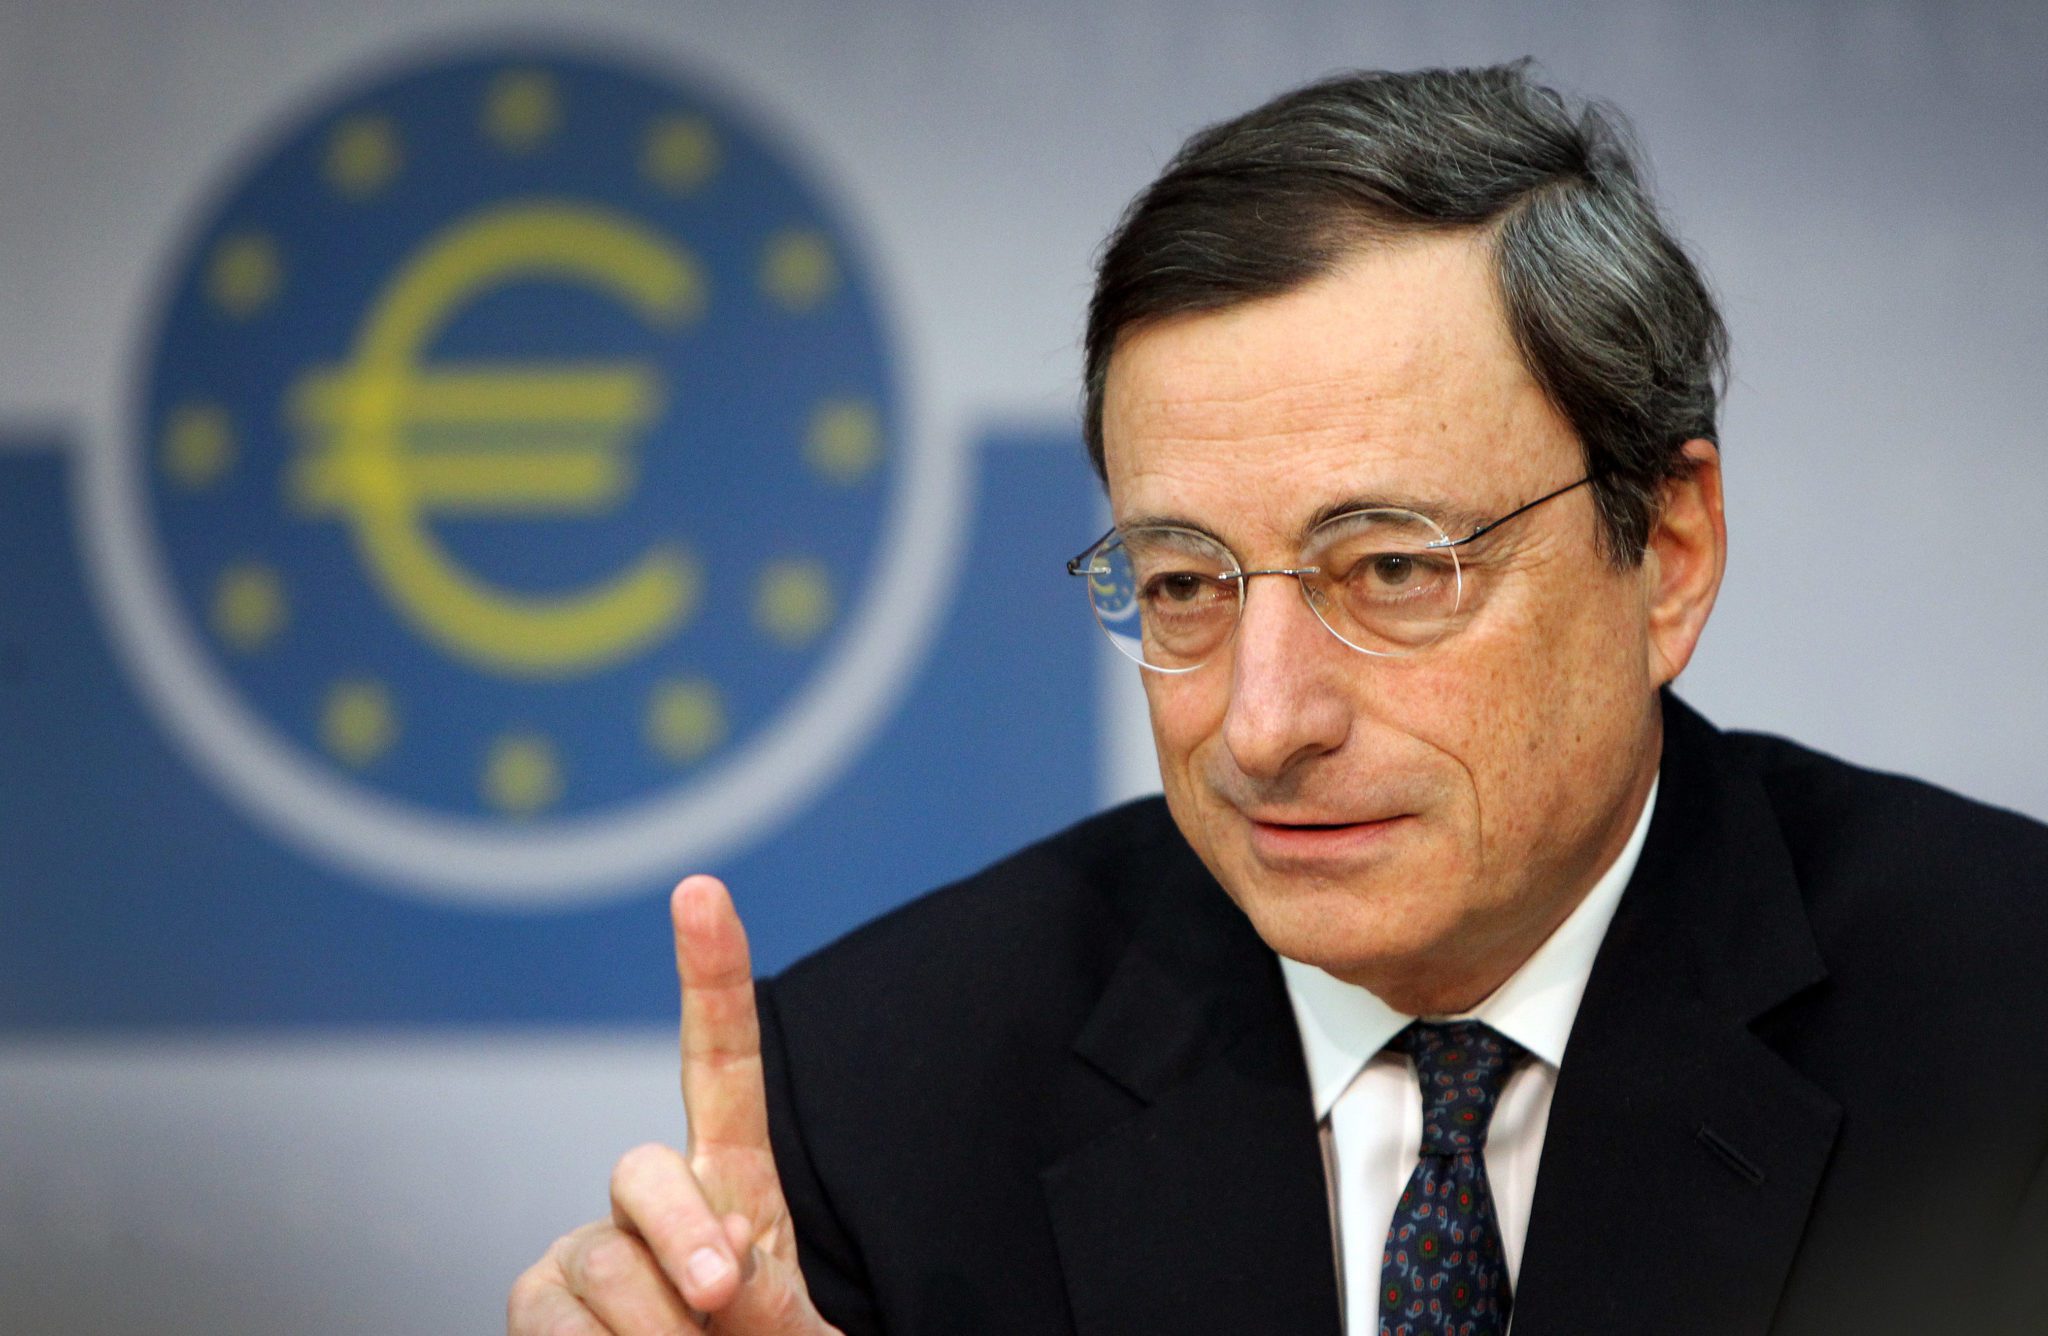 The European Central Bank’s new chief Ma